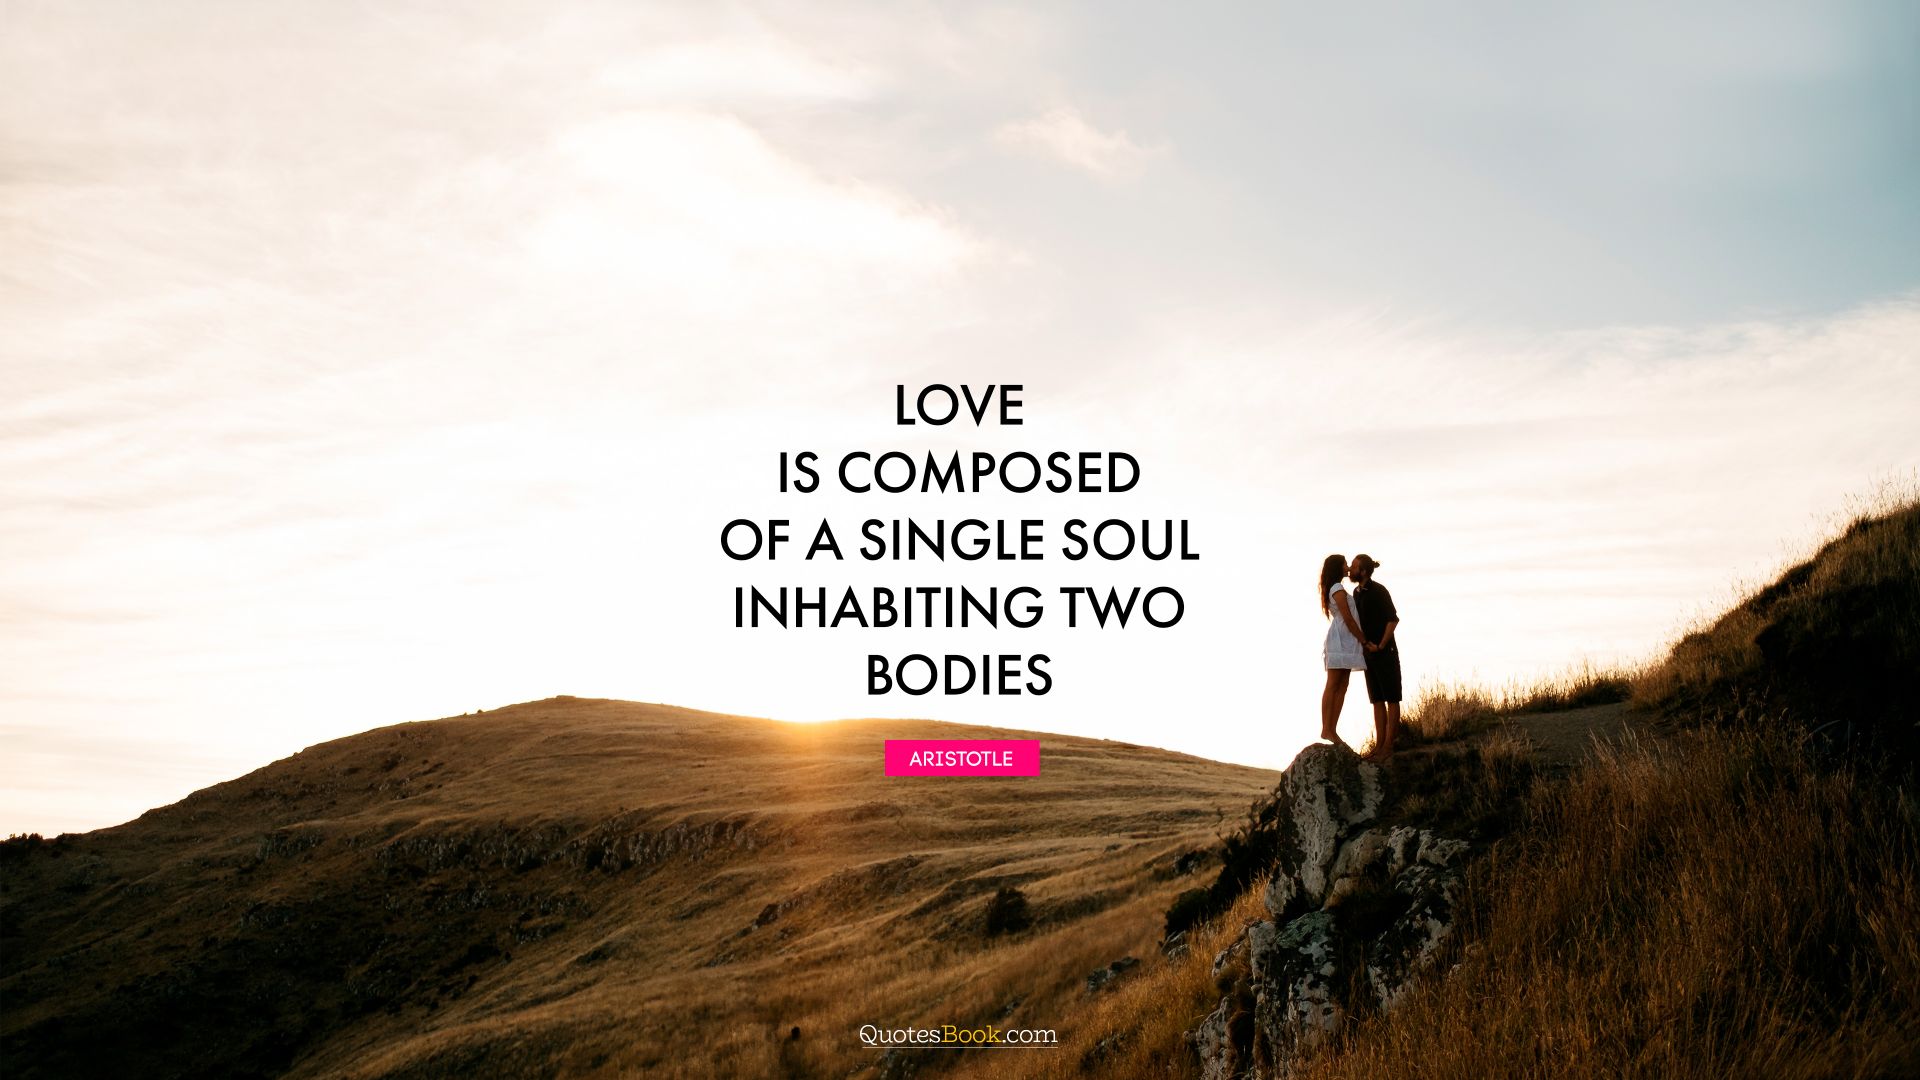 Love is composed of a single soul inhabiting two bodies. - Quote by Aristotle